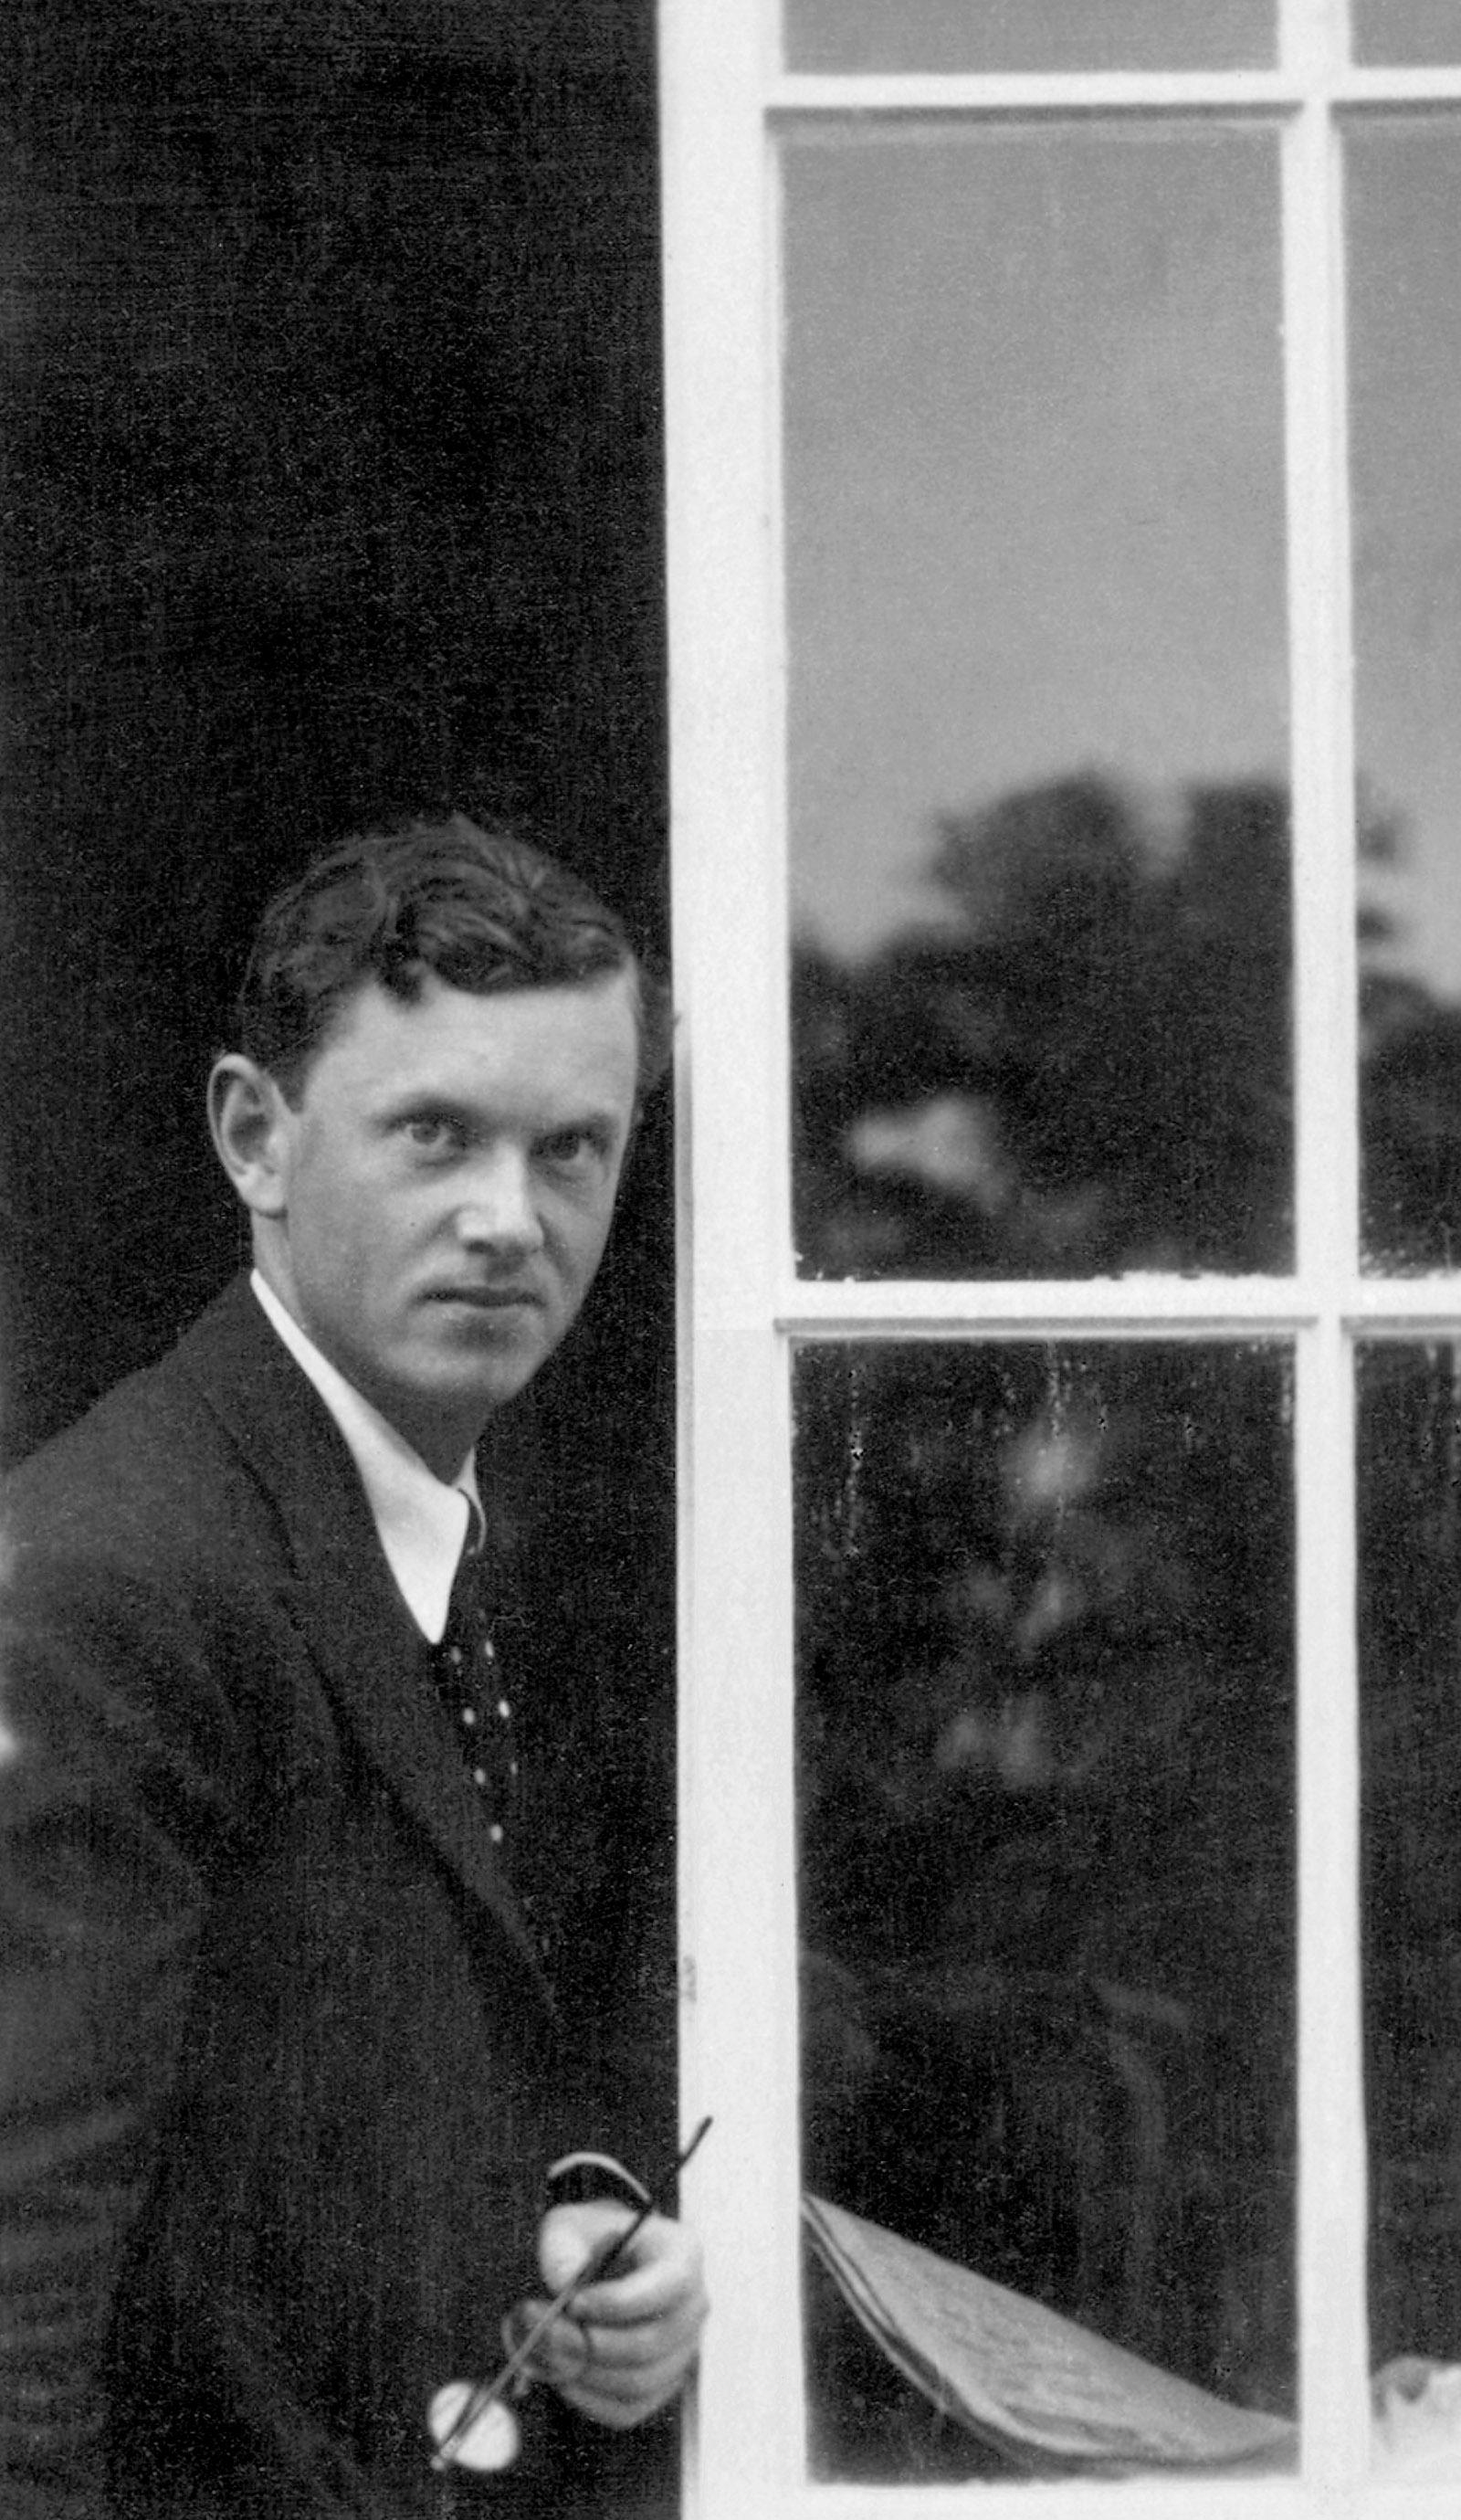 Evelyn Waugh, 1920s; photograph by Cecil Beaton